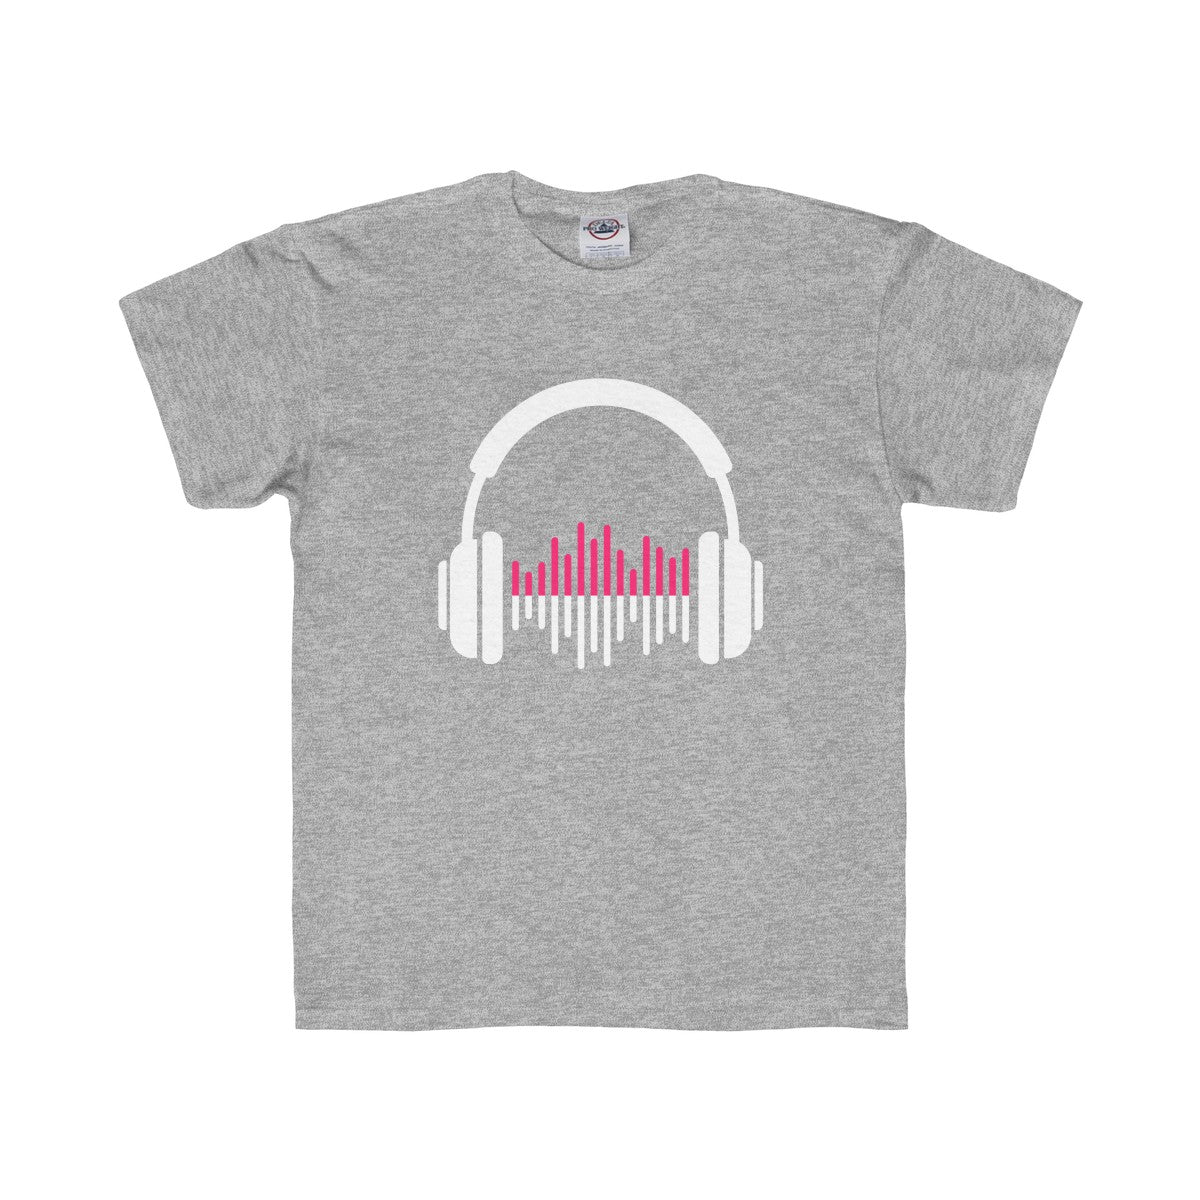 Music Lover Youth Regular Fit Tee-Kids clothes-PureDesignTees